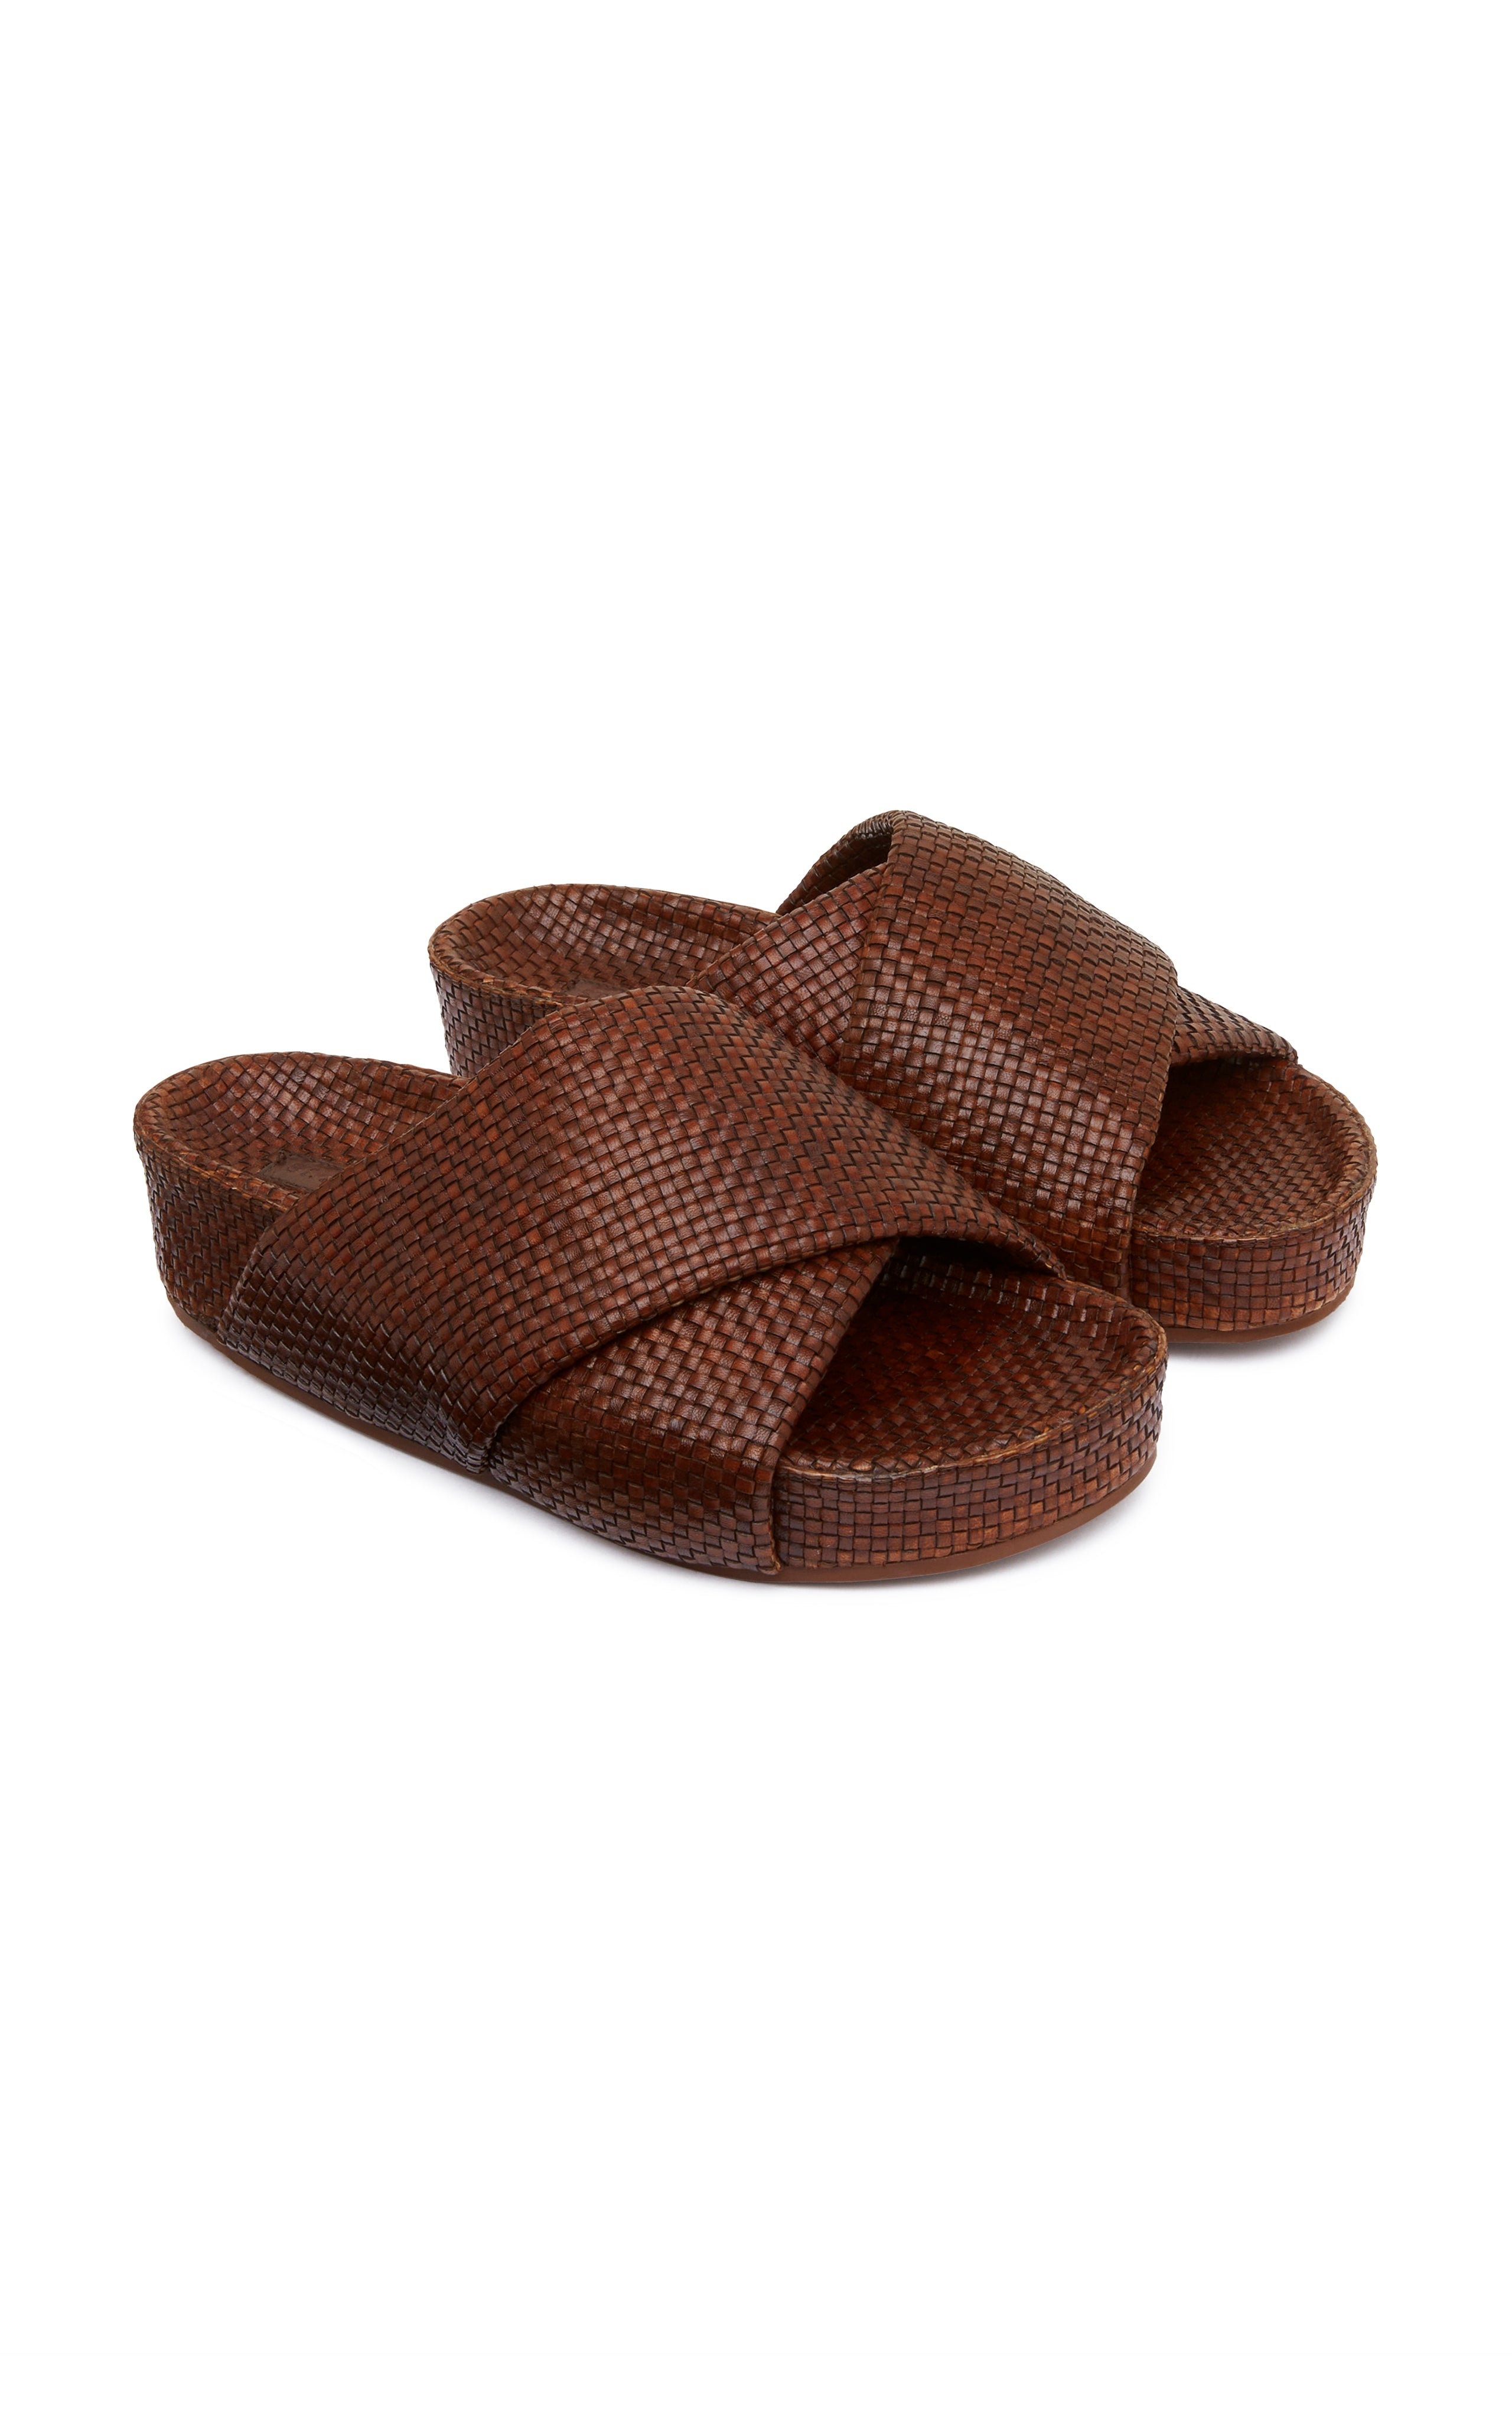 St. Agni Woven Flatform Slide / Available in Antique Tan and Black